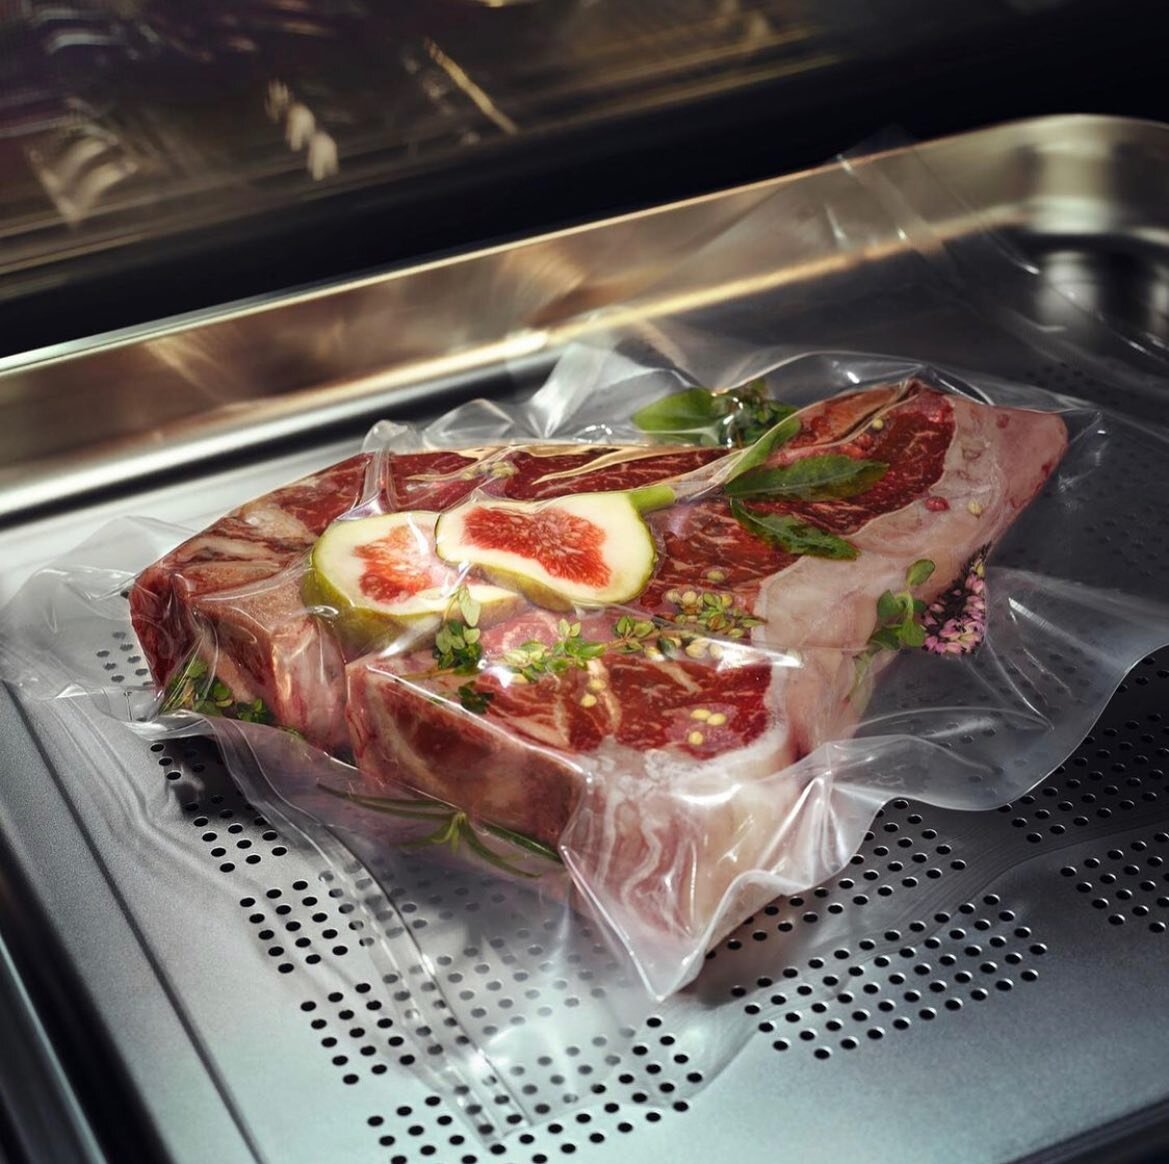 Miele steam ovens and steam combination ovens all feature a &ldquo;Sous-vide&rdquo; operating mode.
You can set the temperature between 115 and 195&deg;F (45 and 90&deg;C), and the maximum cooking duration is 10 hours.
This function enables vacuum-se